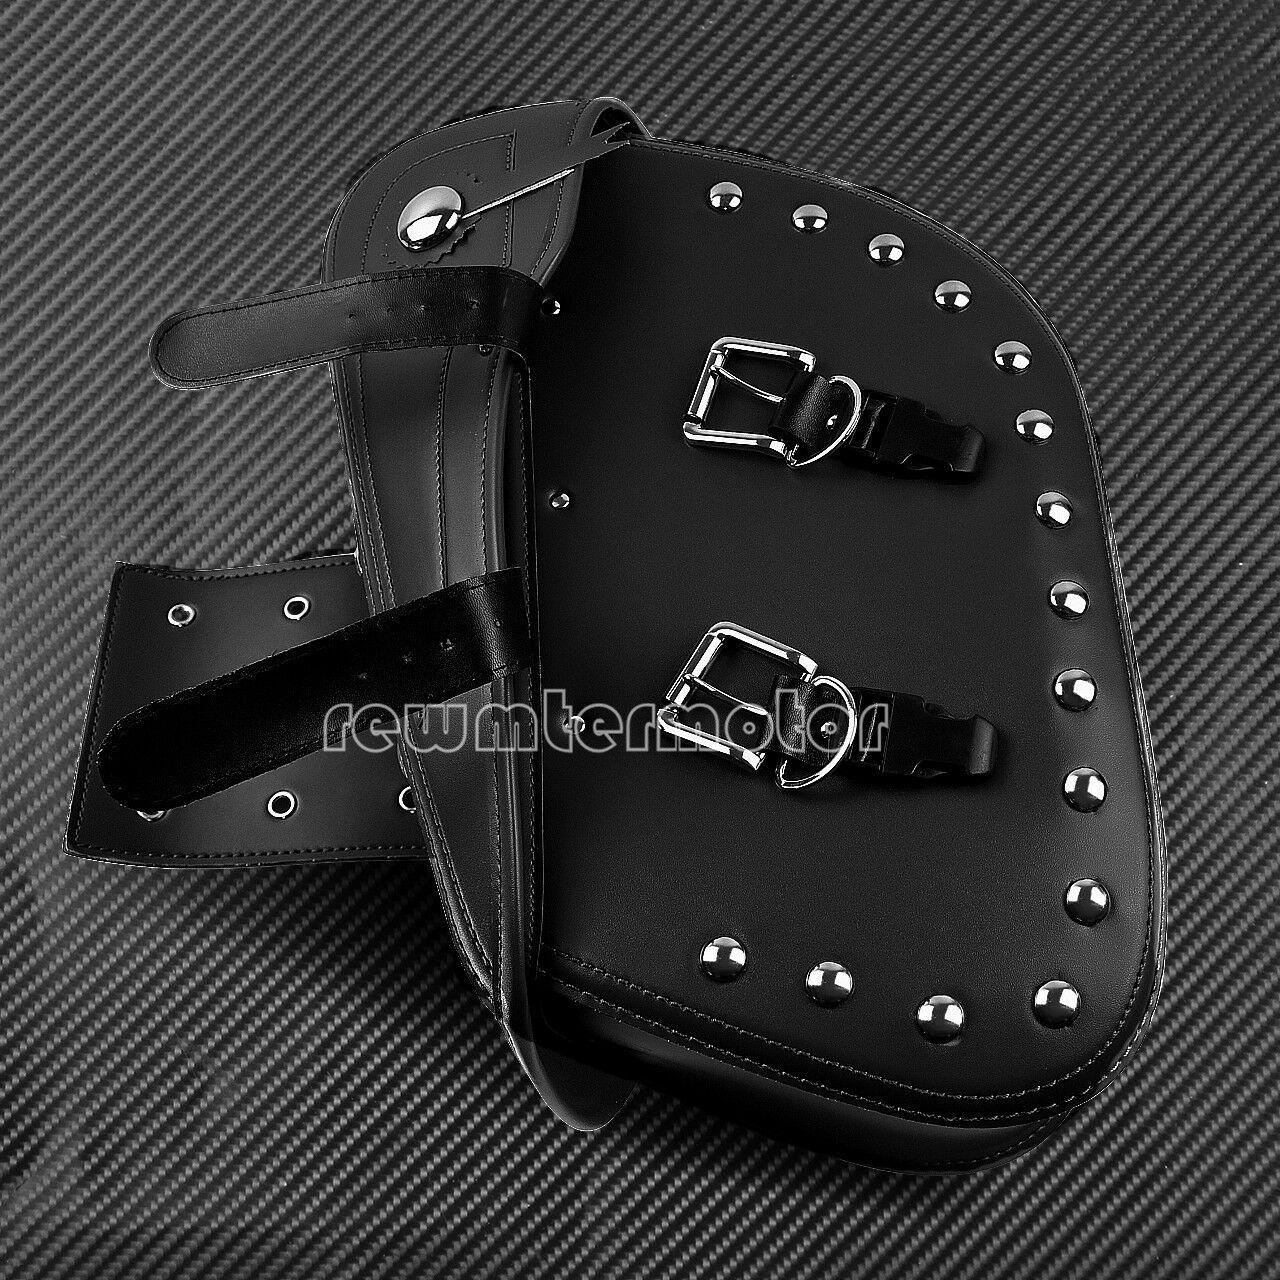 Motorcycle Nails Style Saddle Bags Luggage Tool Bags Fit For Harley Sportster XL - Moto Life Products